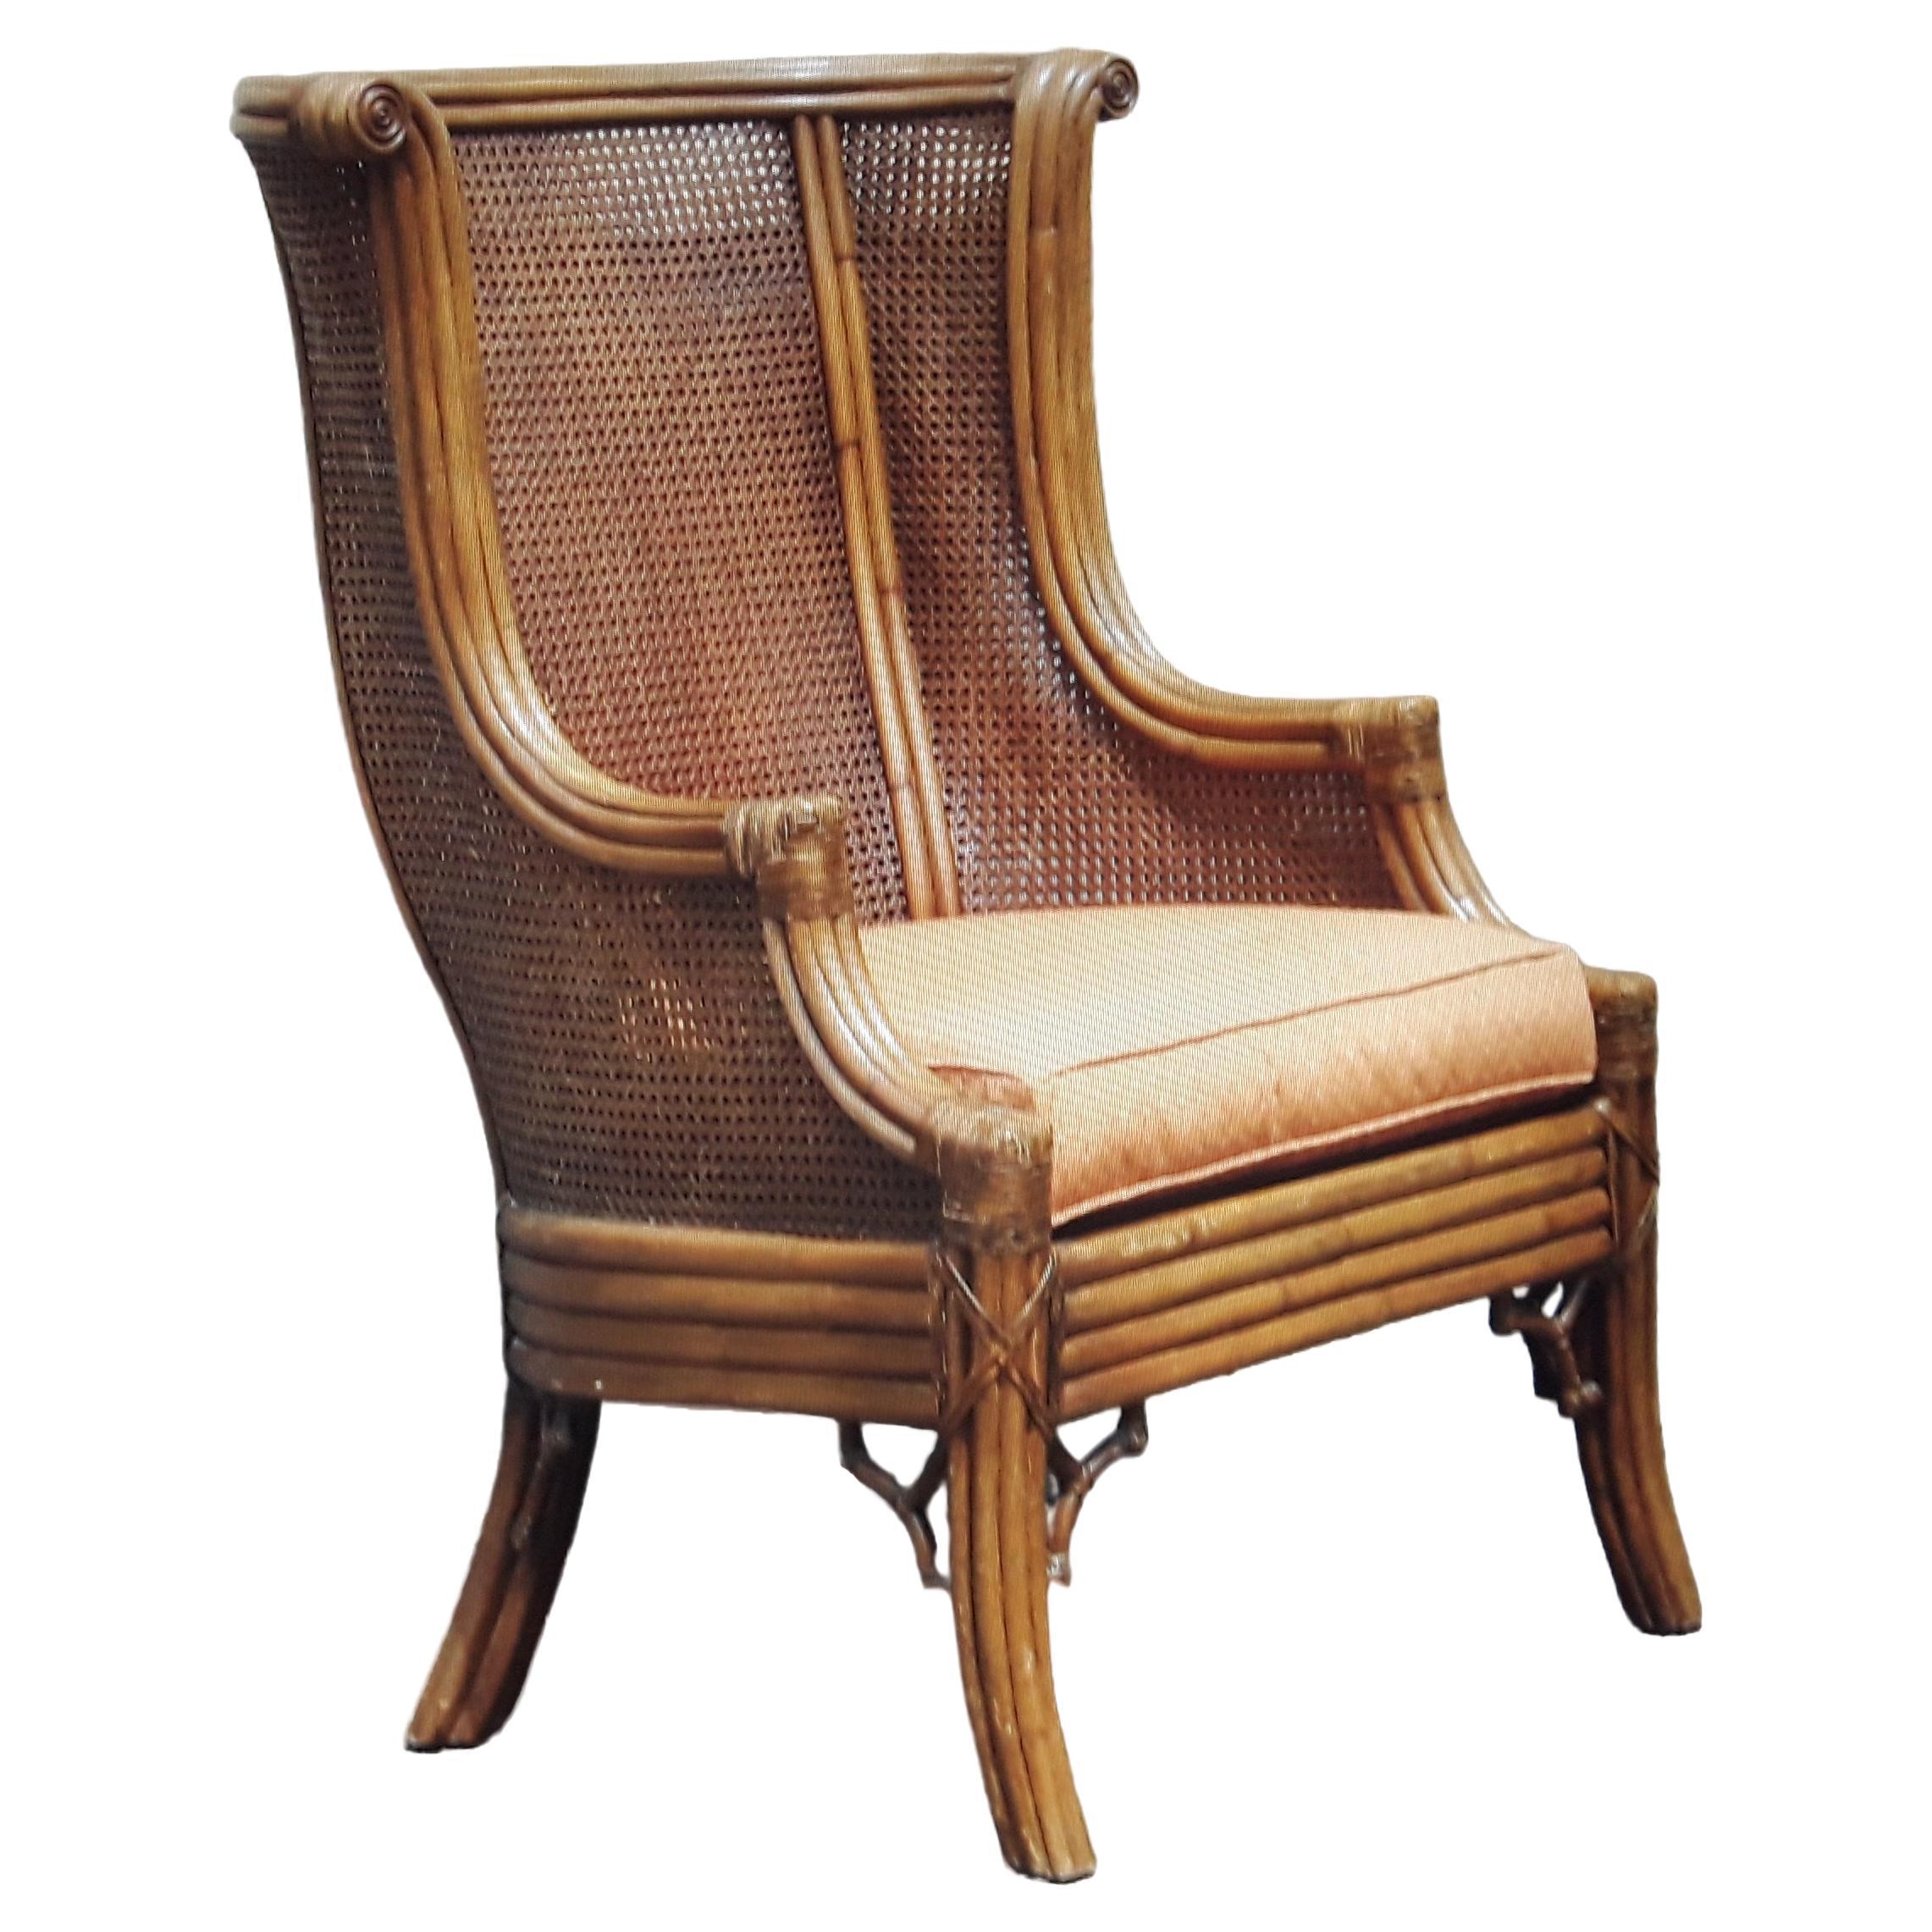 1960's Mid Century Modern Carved Faux Bamboo and Double Caned Wingback Chair For Sale